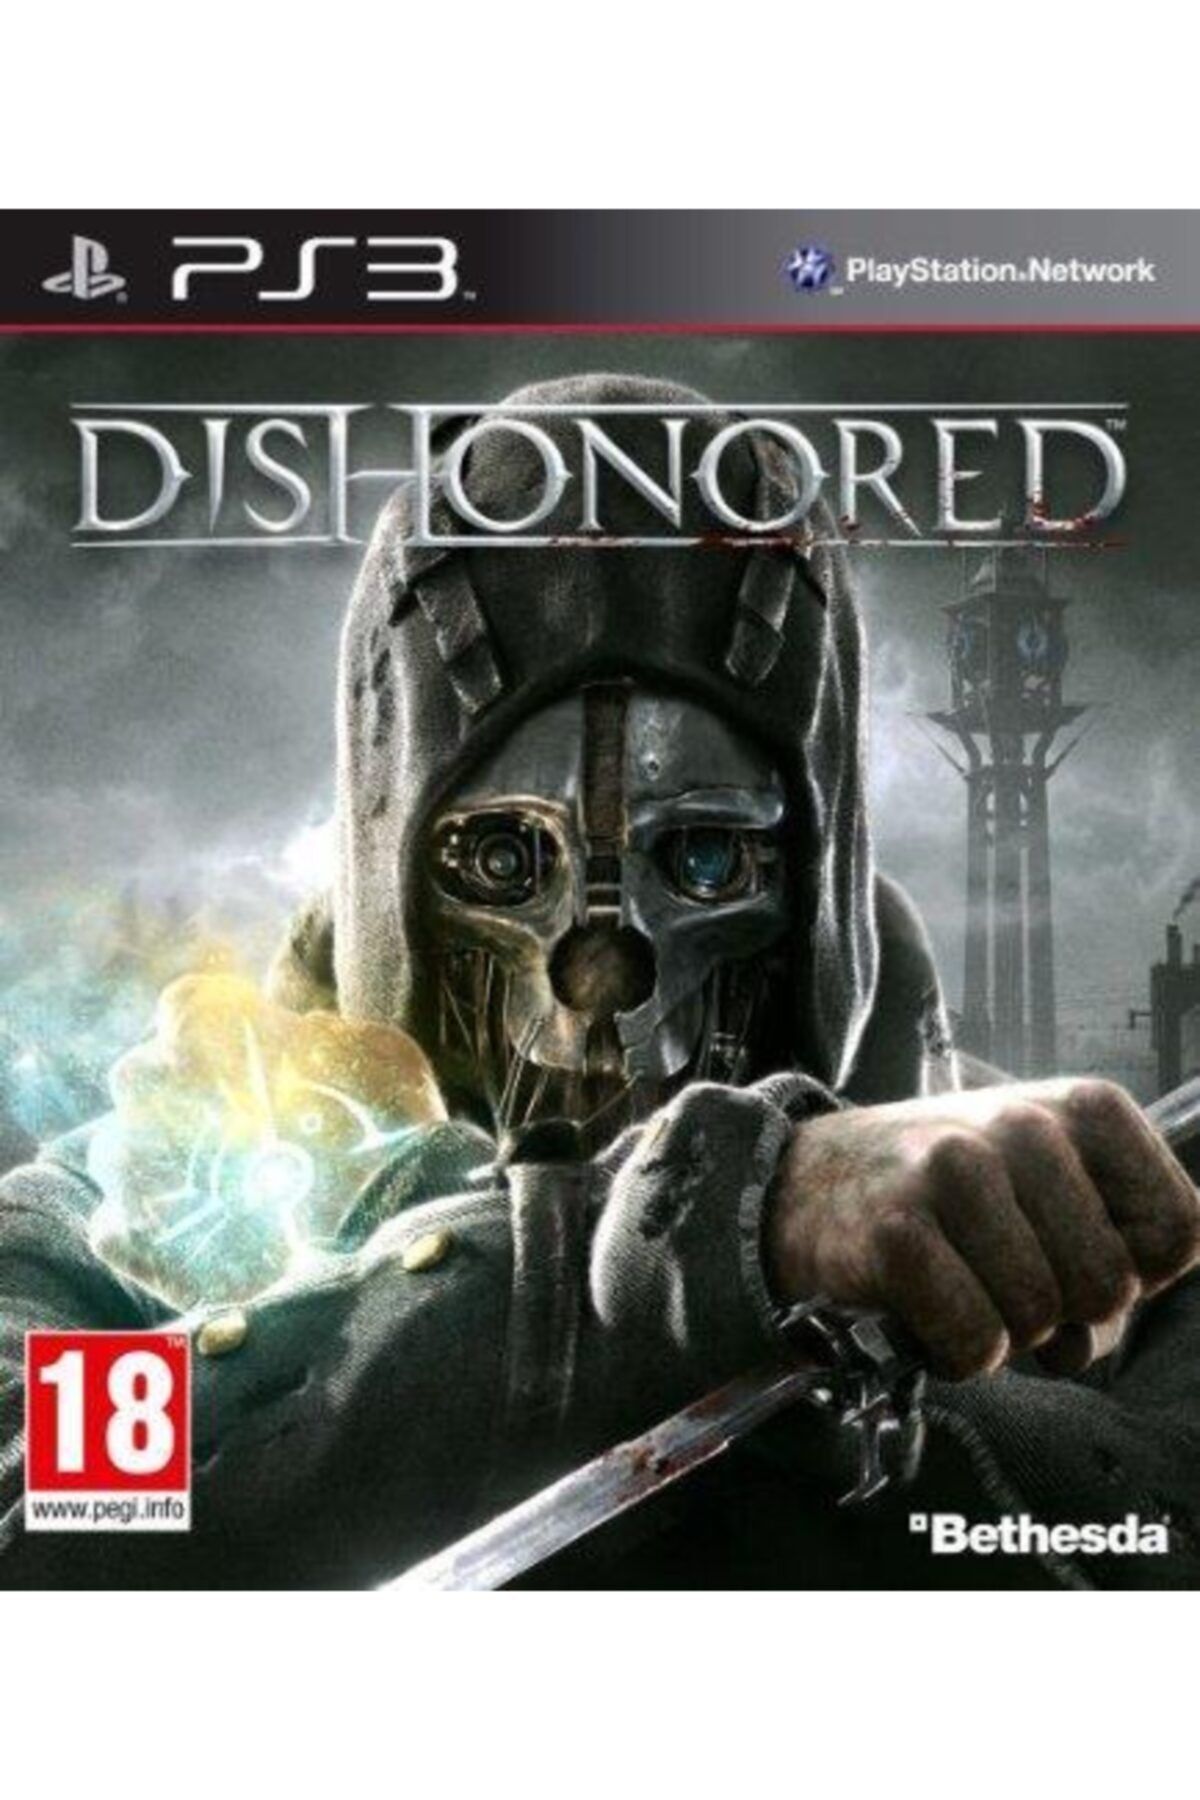 BETHESDA Ps3 Dıshonored